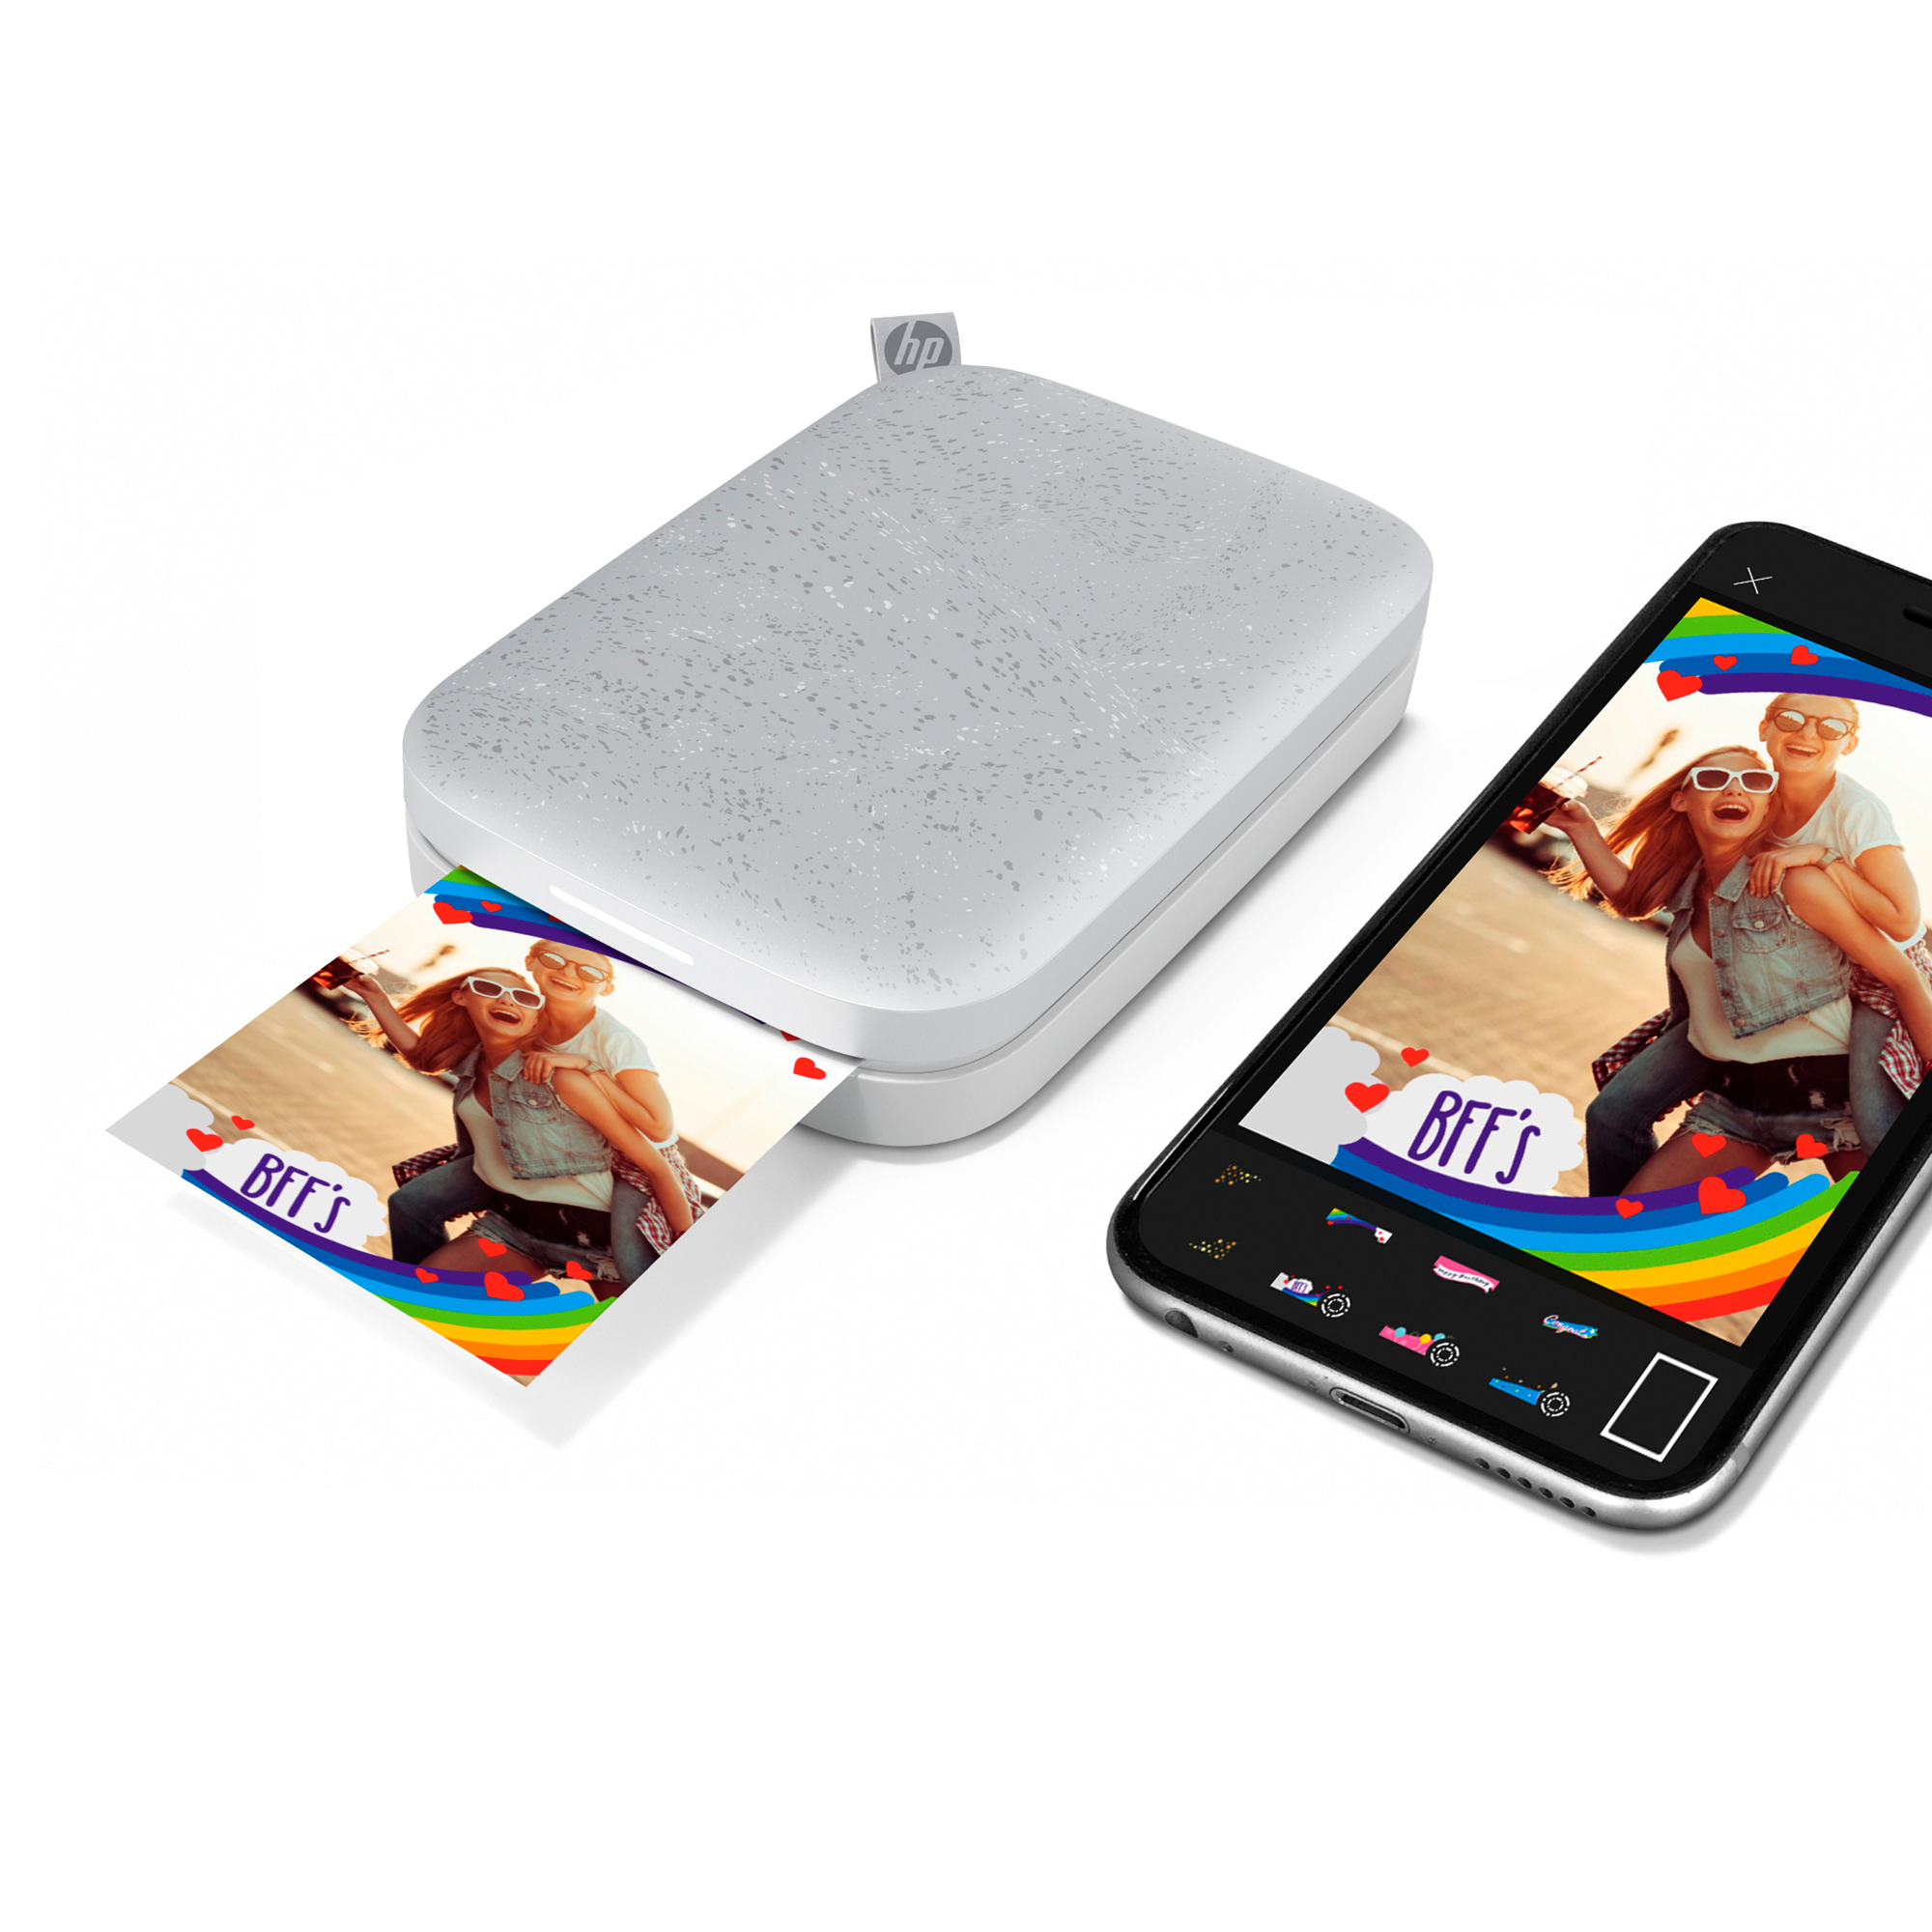 HP Sprocket Portable 2x3" Instant Photo Printer (Luna Pearl), for Ios or Android - image 4 of 8